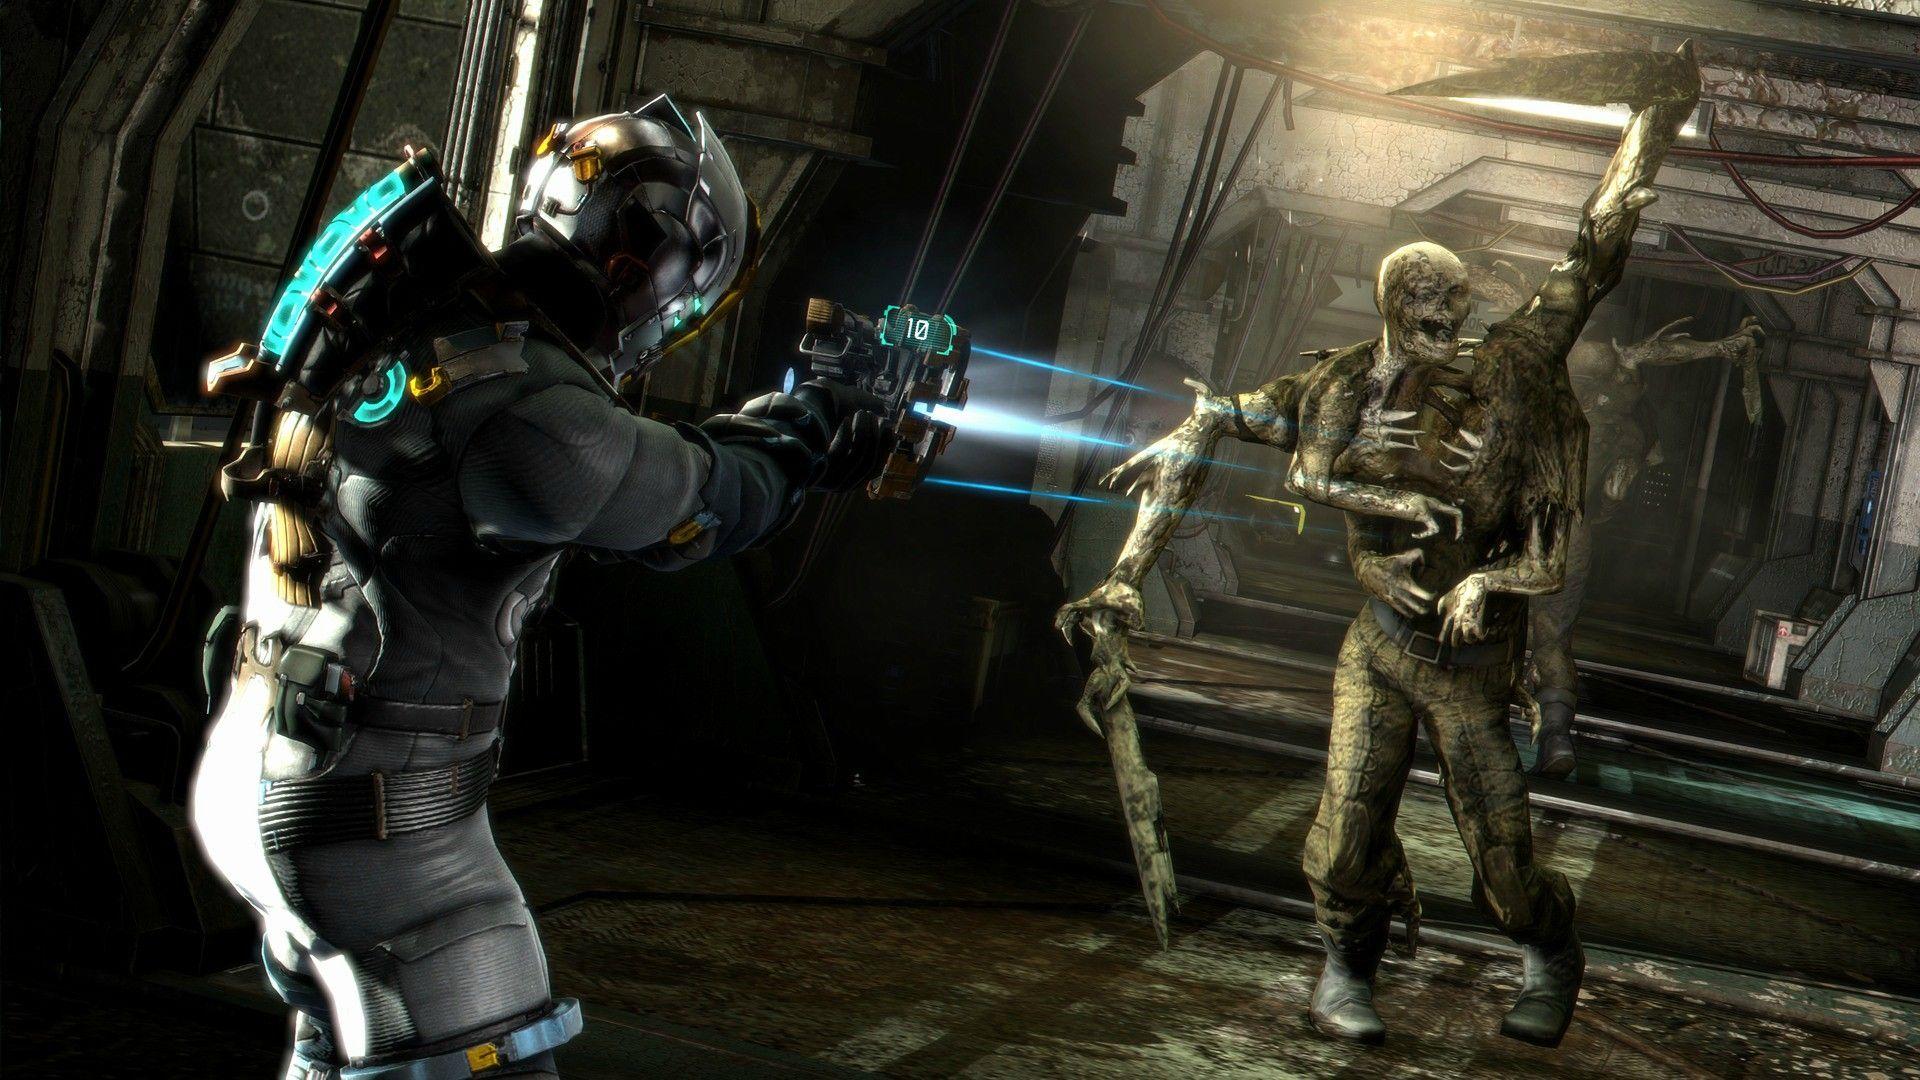 Is now the time for Dead Space 4 or Dead Space Trilogy Remastered